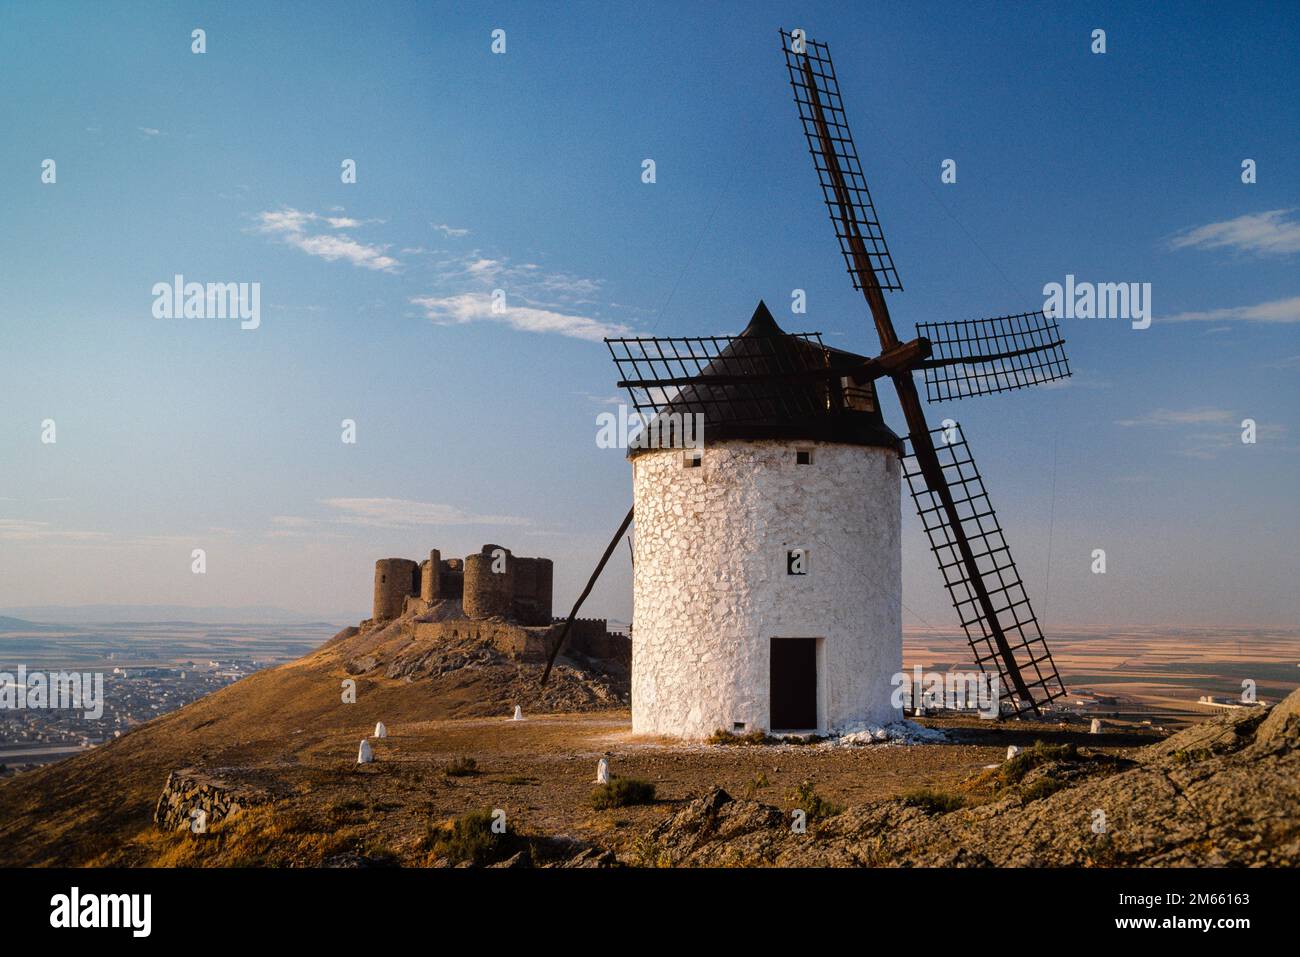 Spain windmill, view of an historic windmill and castle sited on a hill in Consuegra overlooking the plain of La Mancha, Castilla-La Mancha, Spain Stock Photo